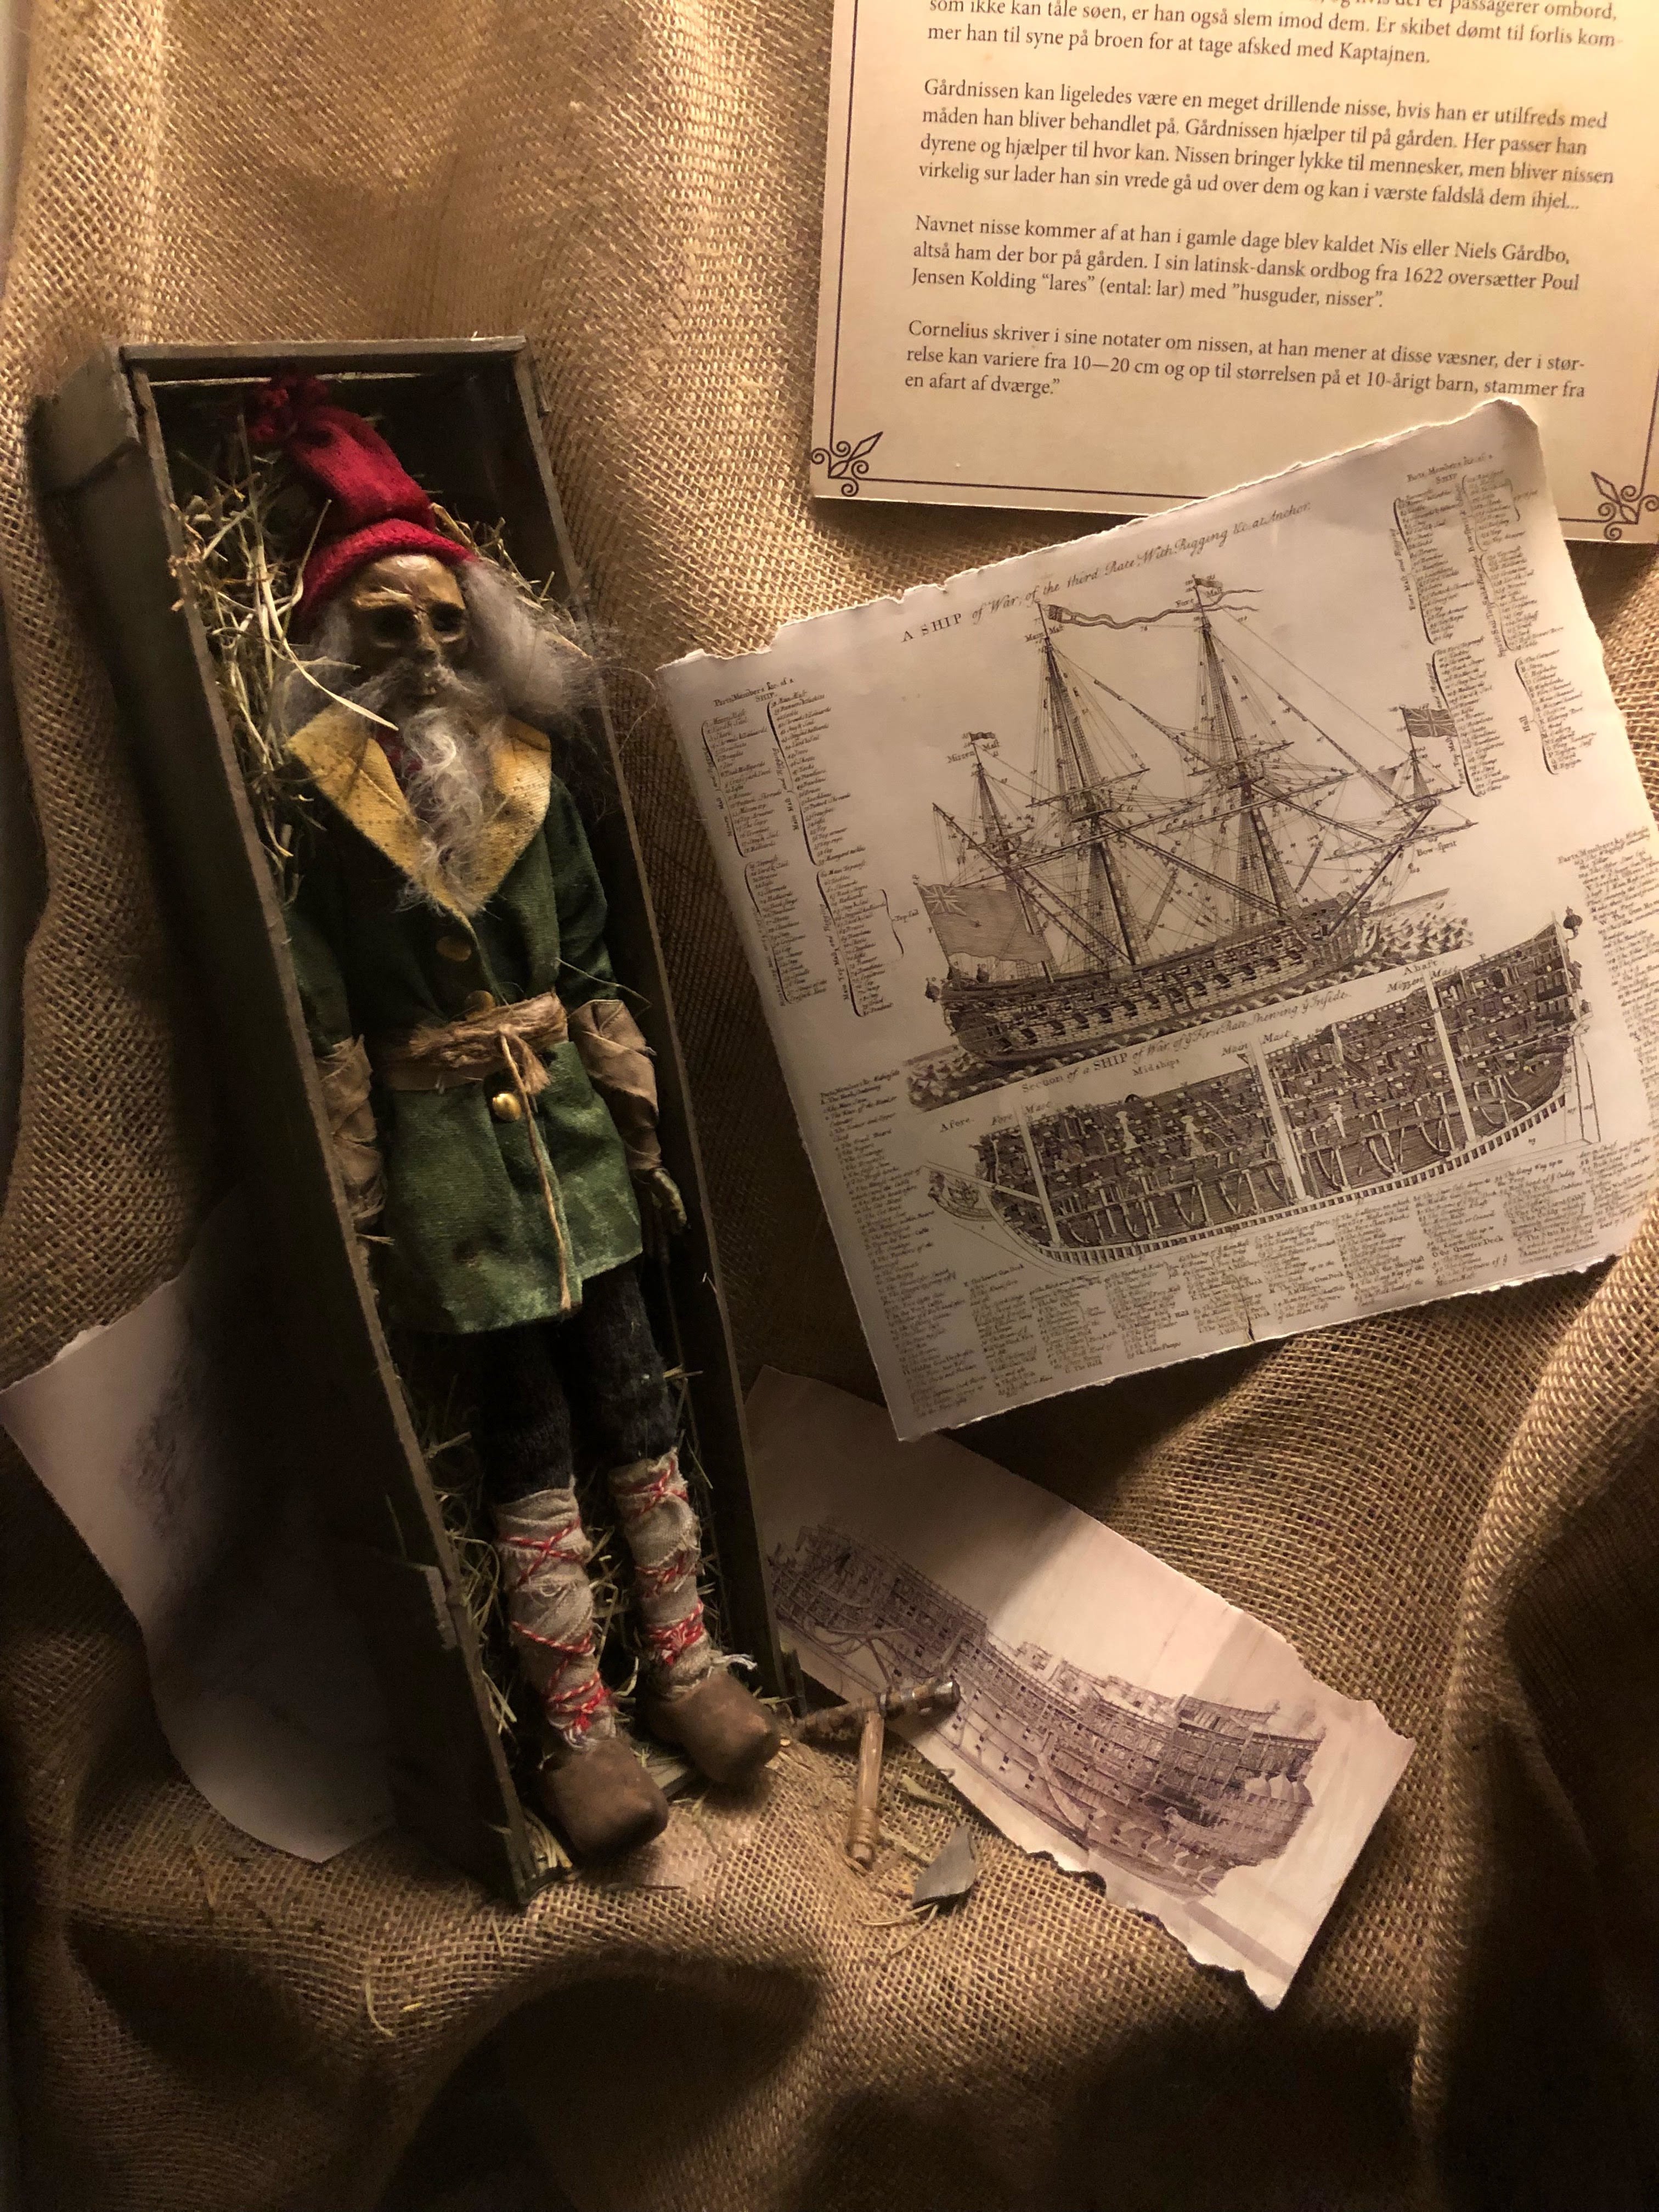 A bearded doll in a box with illustrations of ships.